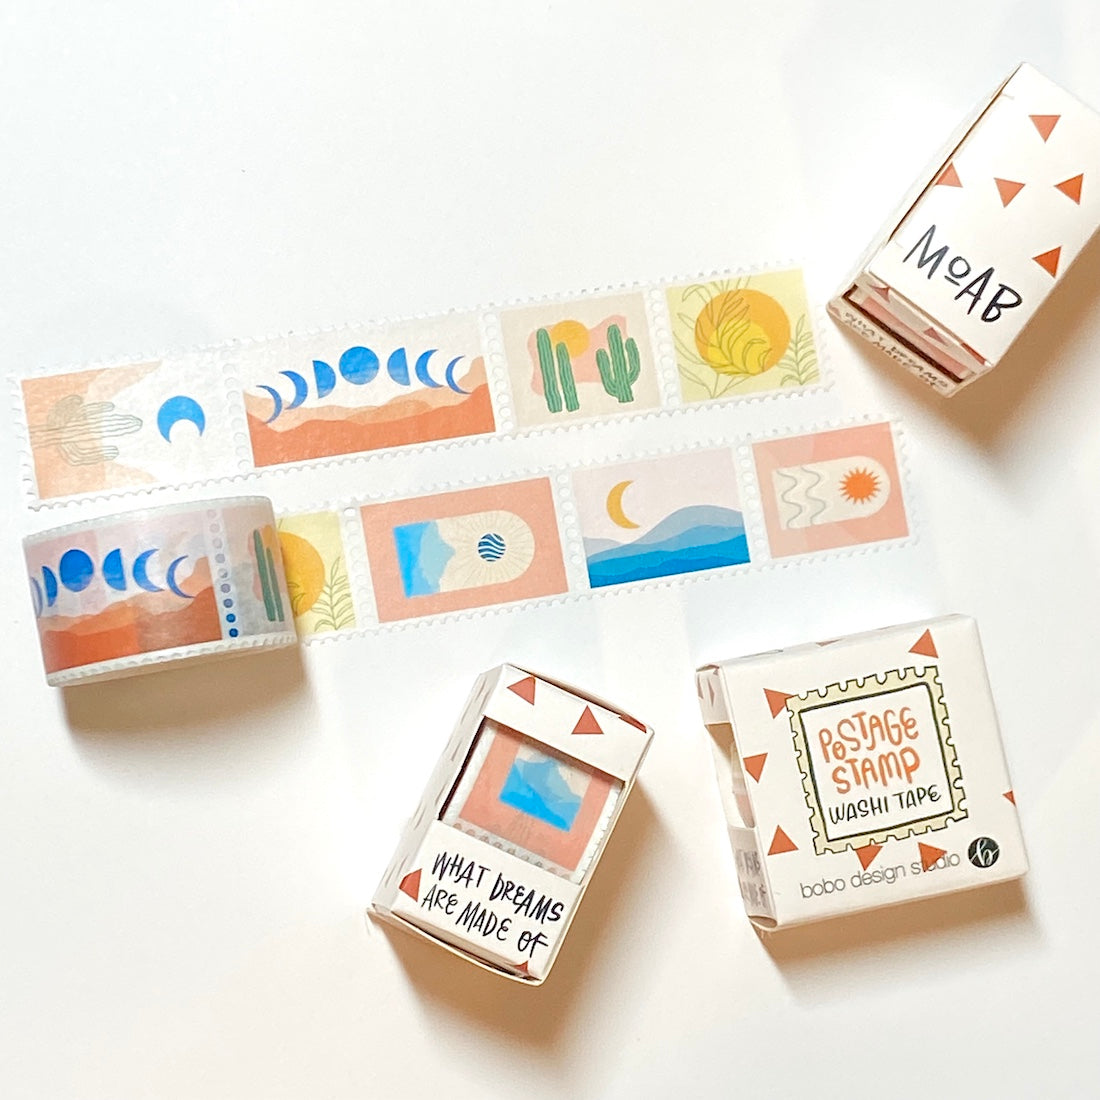 The Moab Postage Stamp Washi Tape features 7 unique designs capturing the magic of Moab.